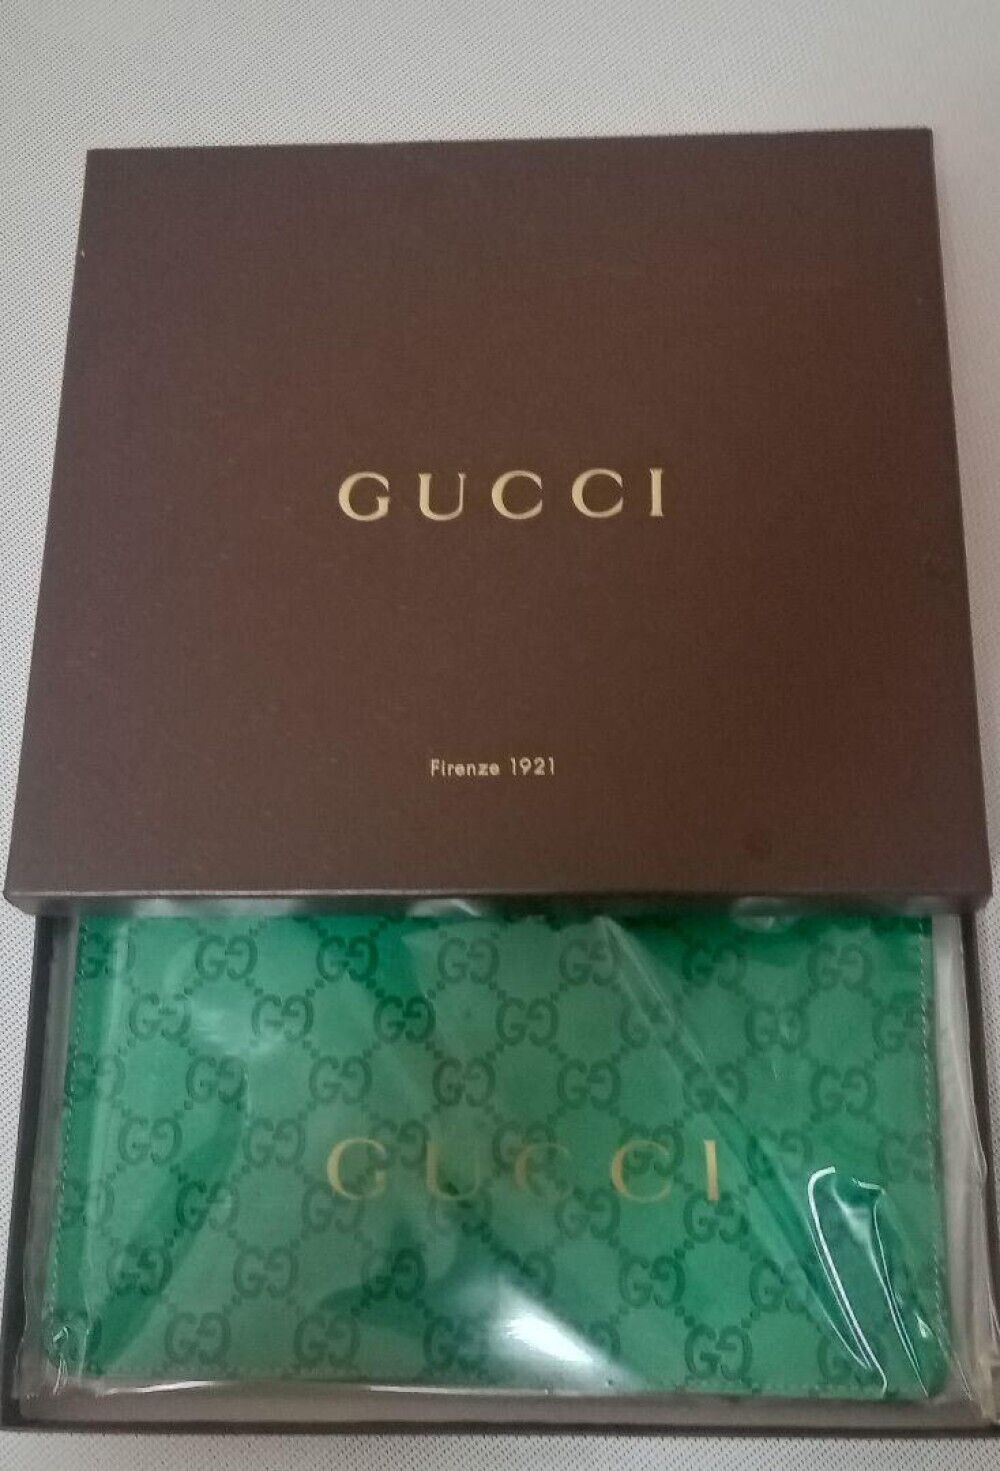 Gucci Mouse Pad New Monogram Striped Limited Green Brown Color Rare Pad #G001